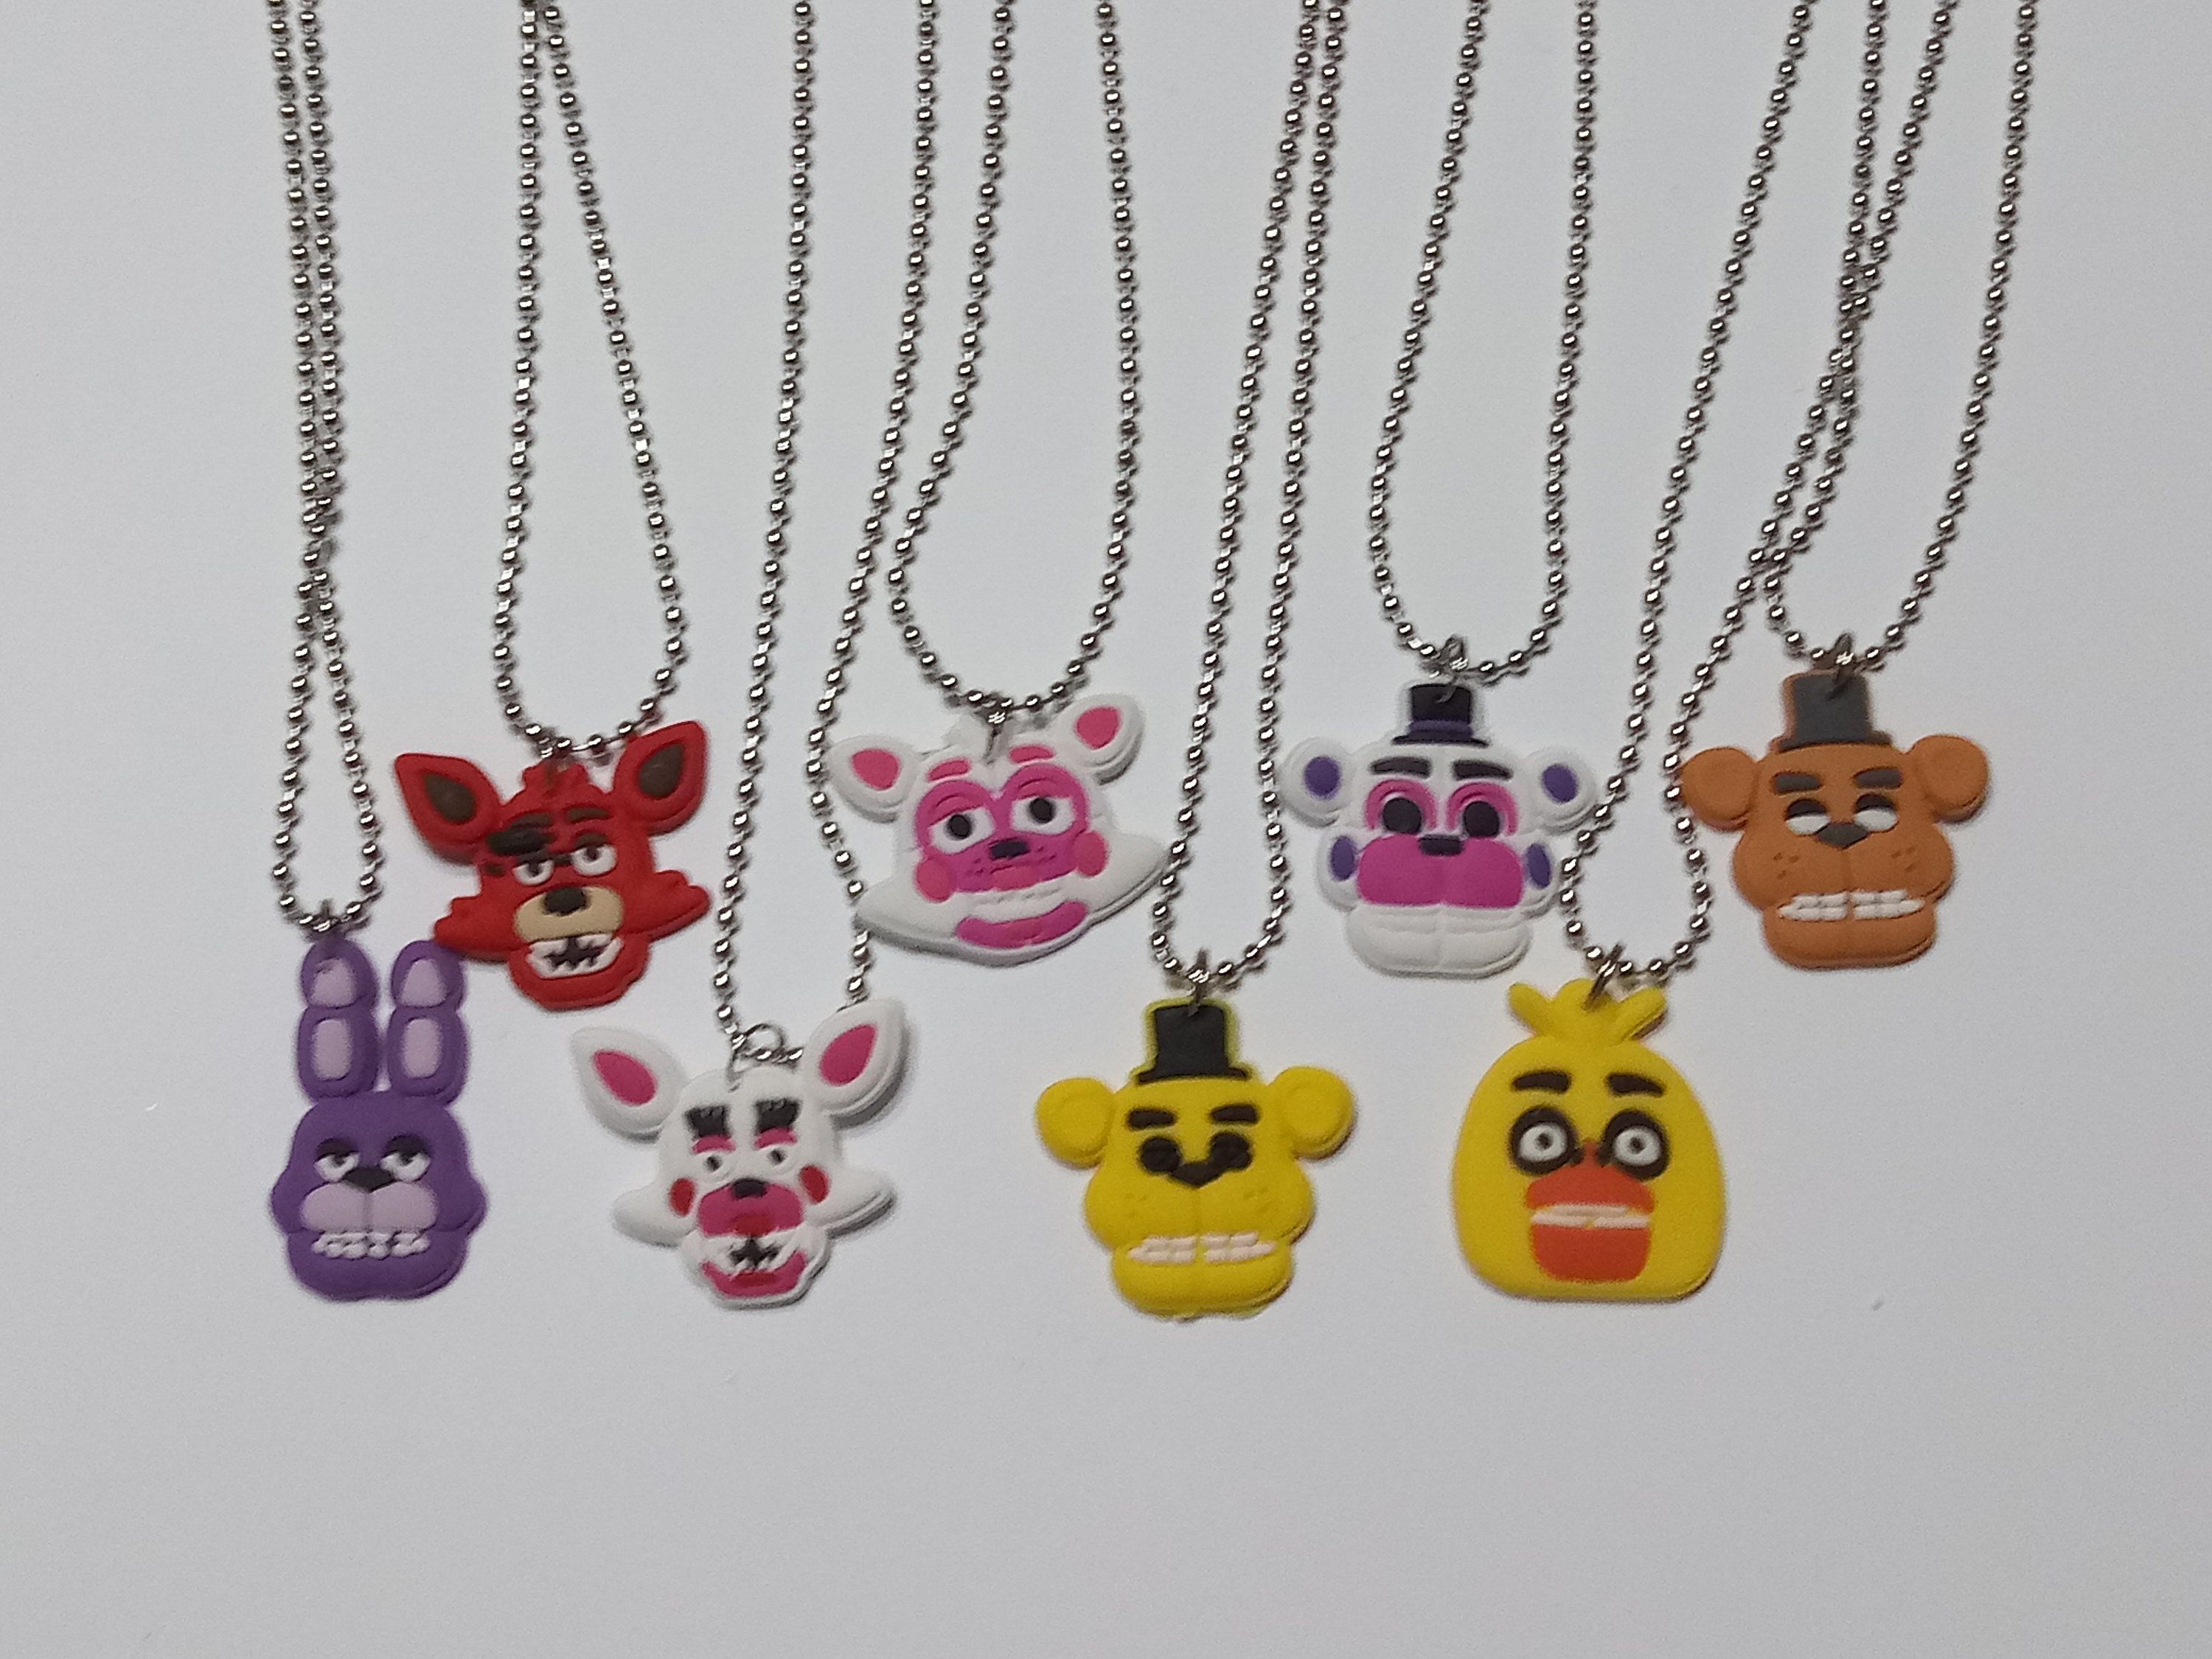 12 FNAF B/P MEDALS NECKLACES, birthday party favors FIVE NIGHTS AT FREDDY'S